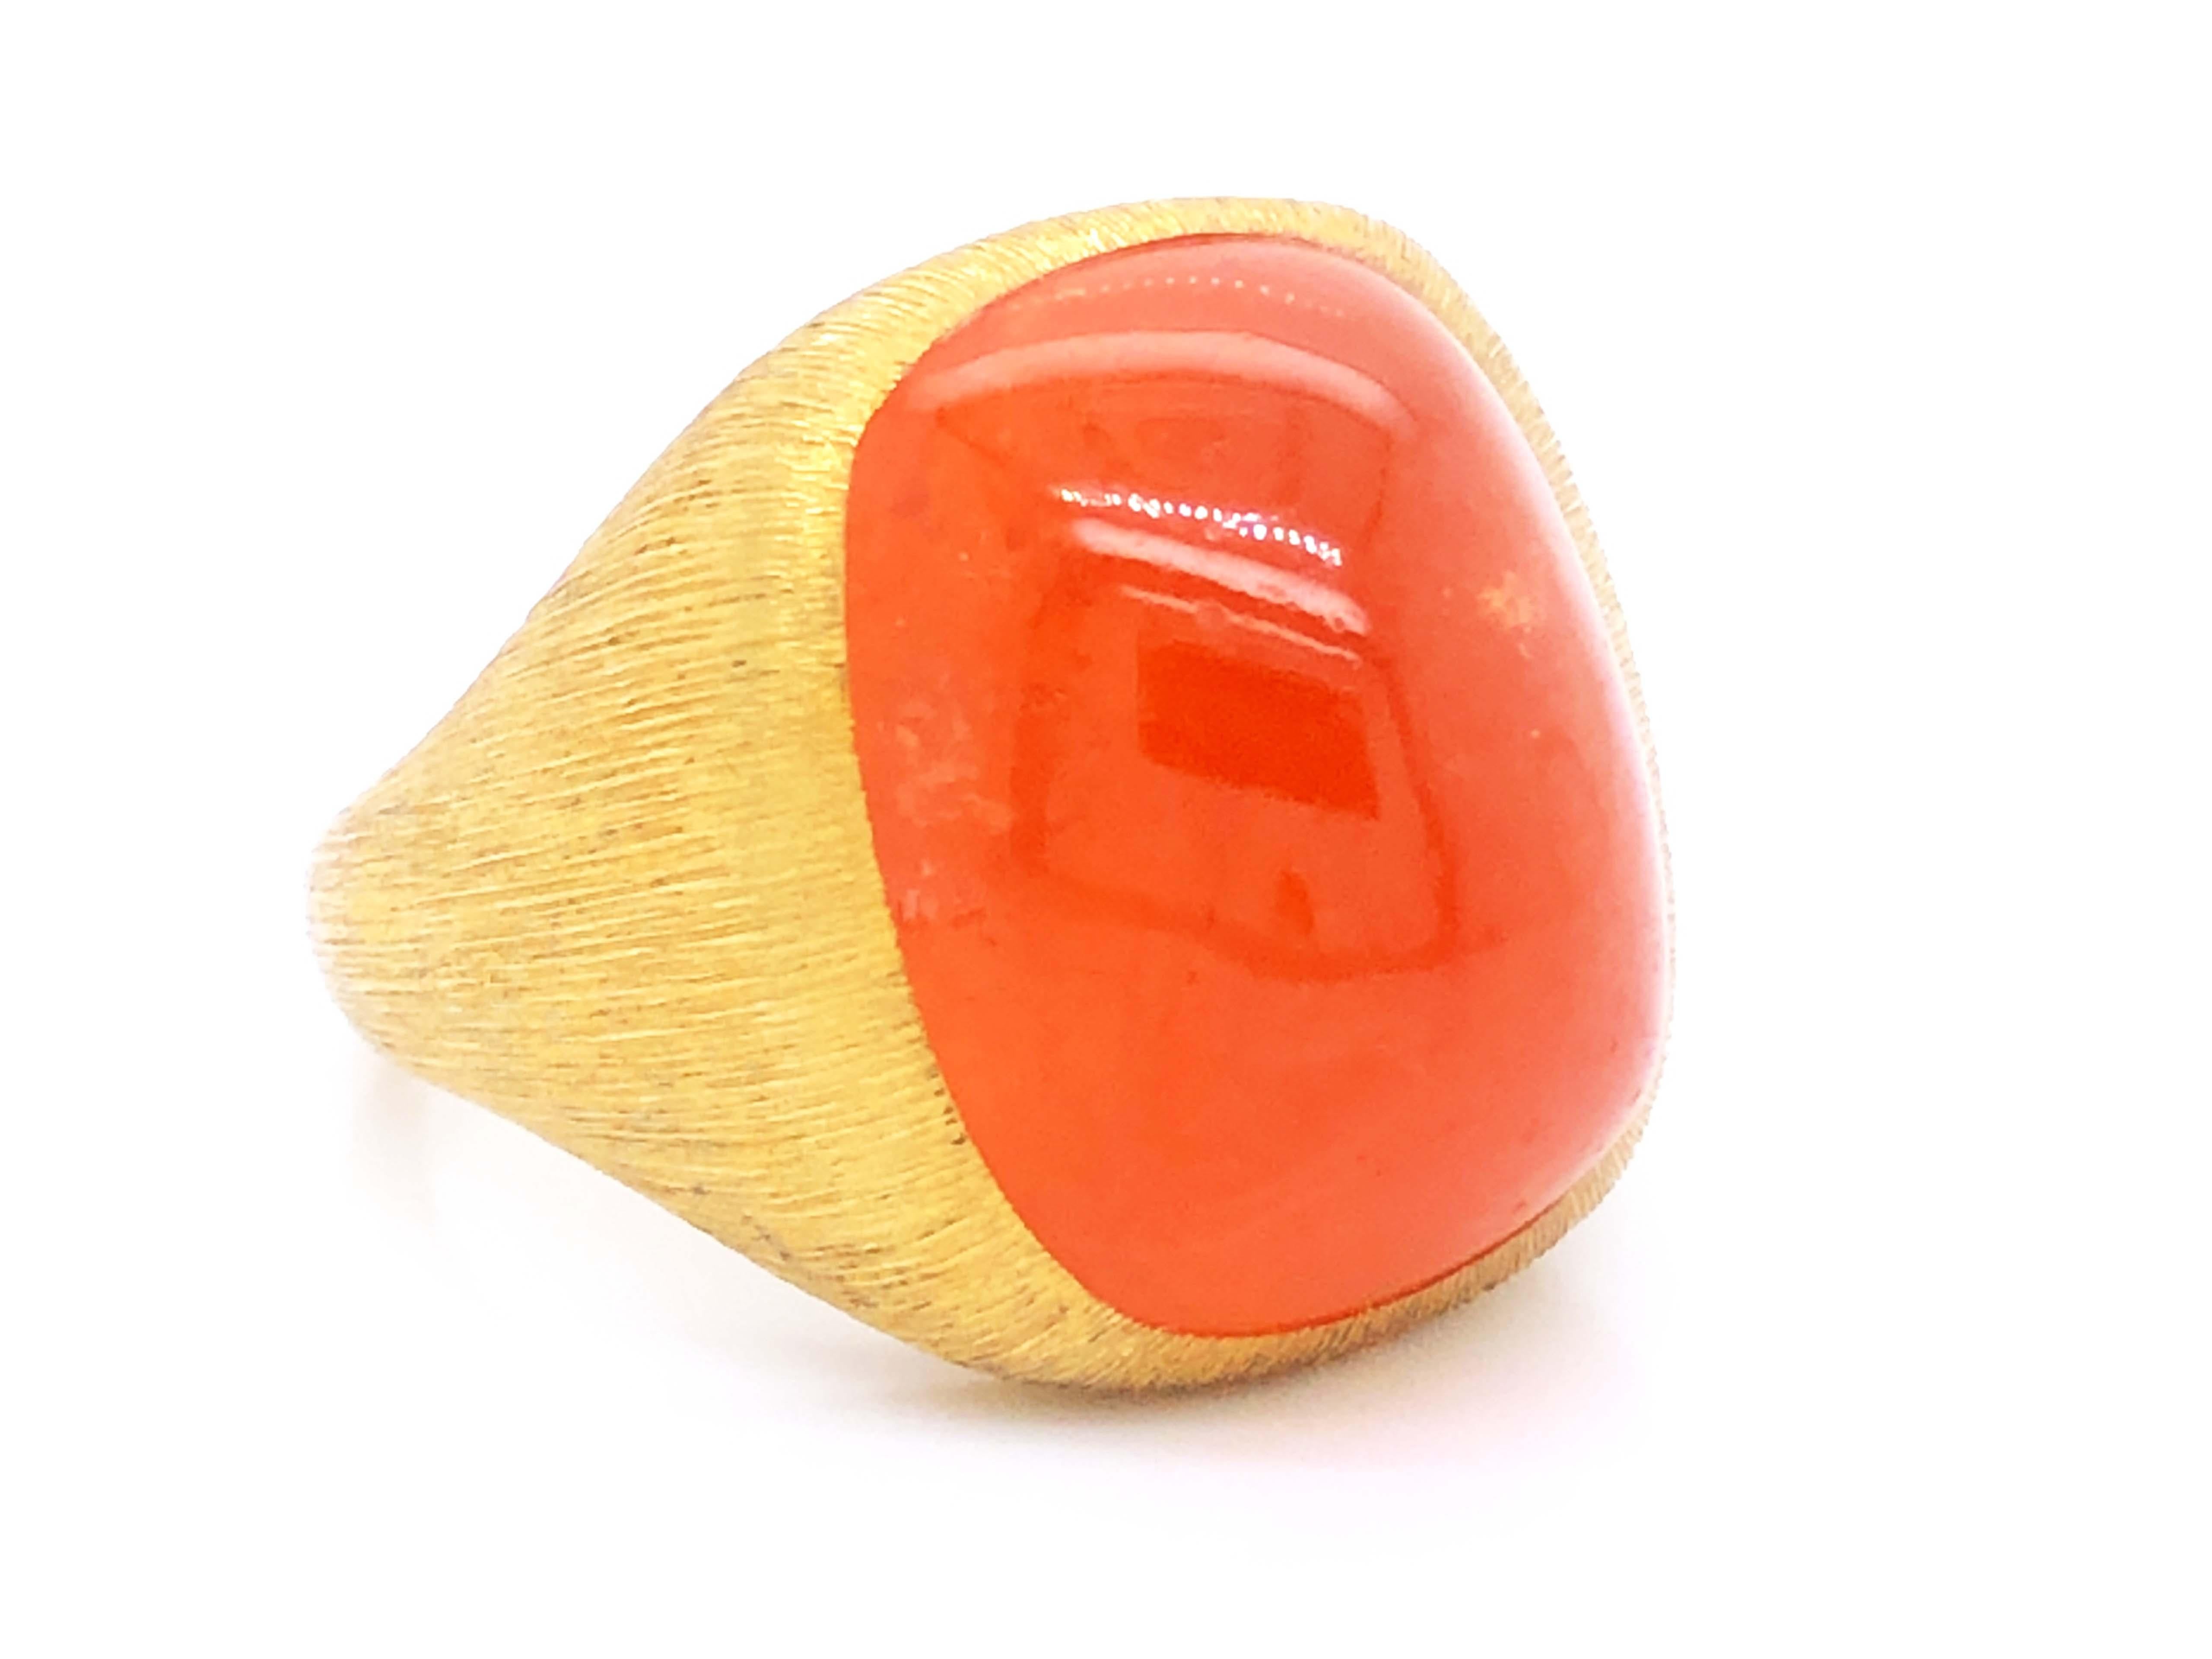 Modern Henry Dunay Sugerloaf Citrine Mens Ring in 18k Yellow Gold